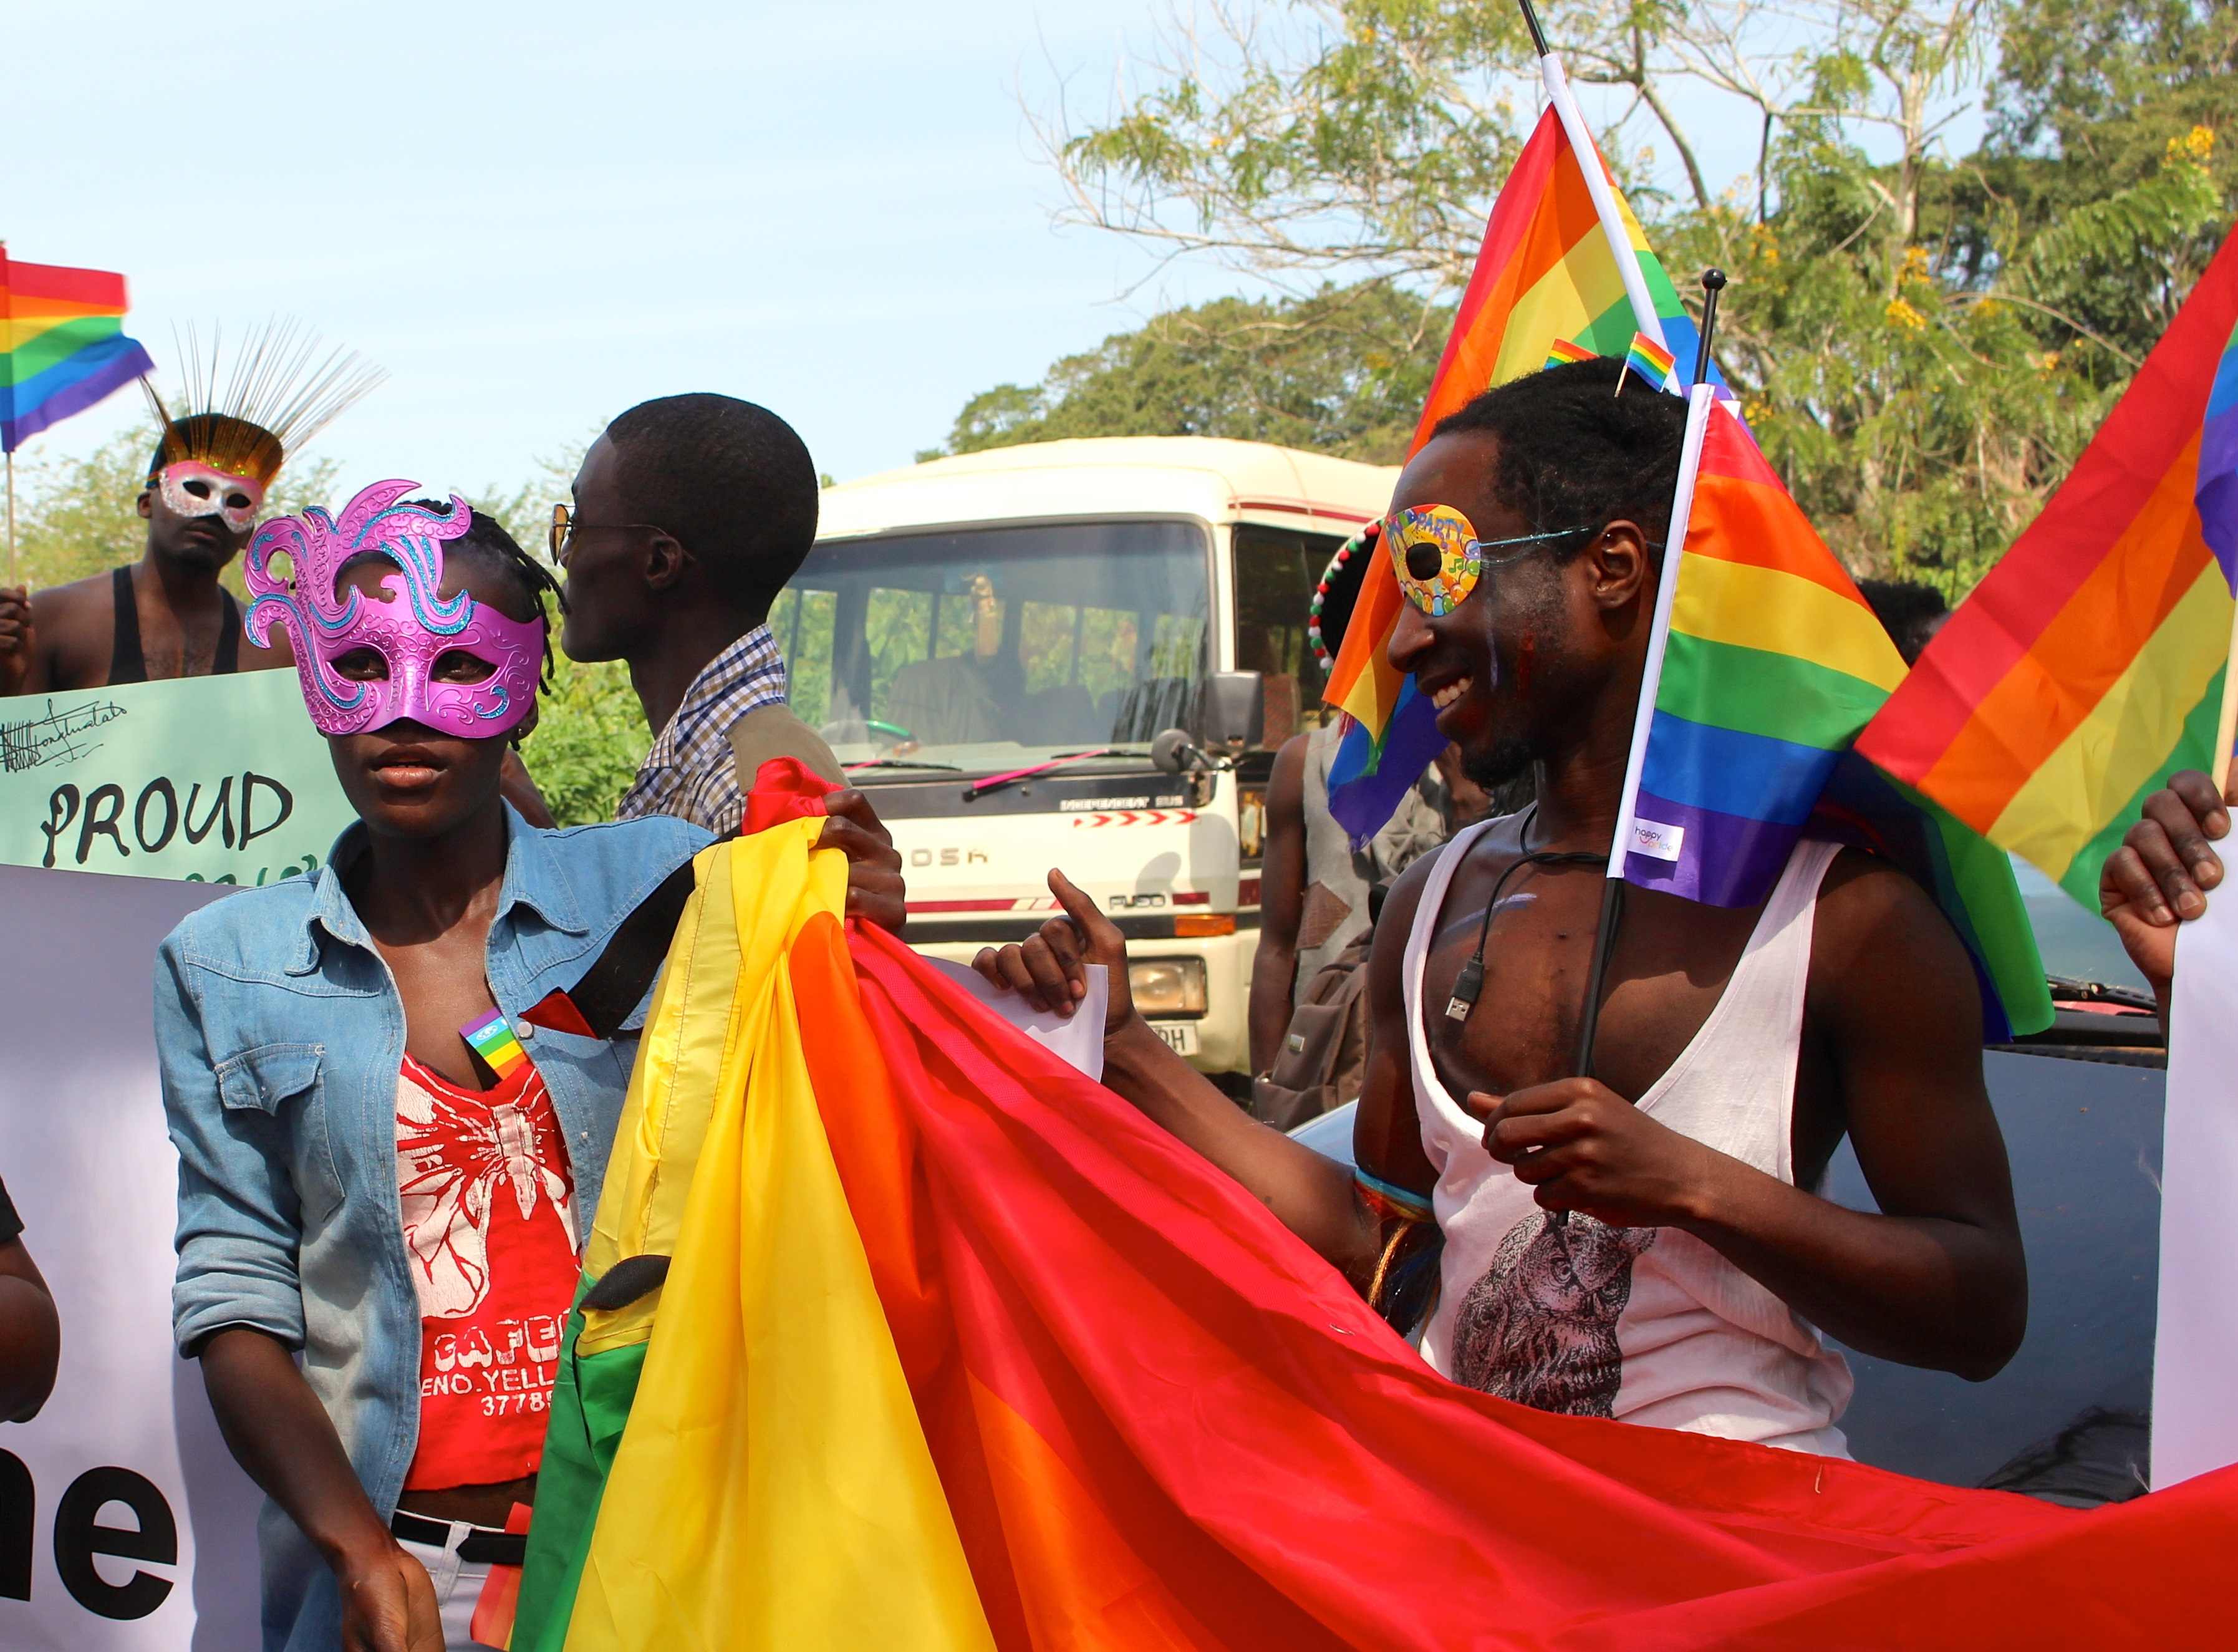 Just how serious is South Africa about gay rights? - ISS 